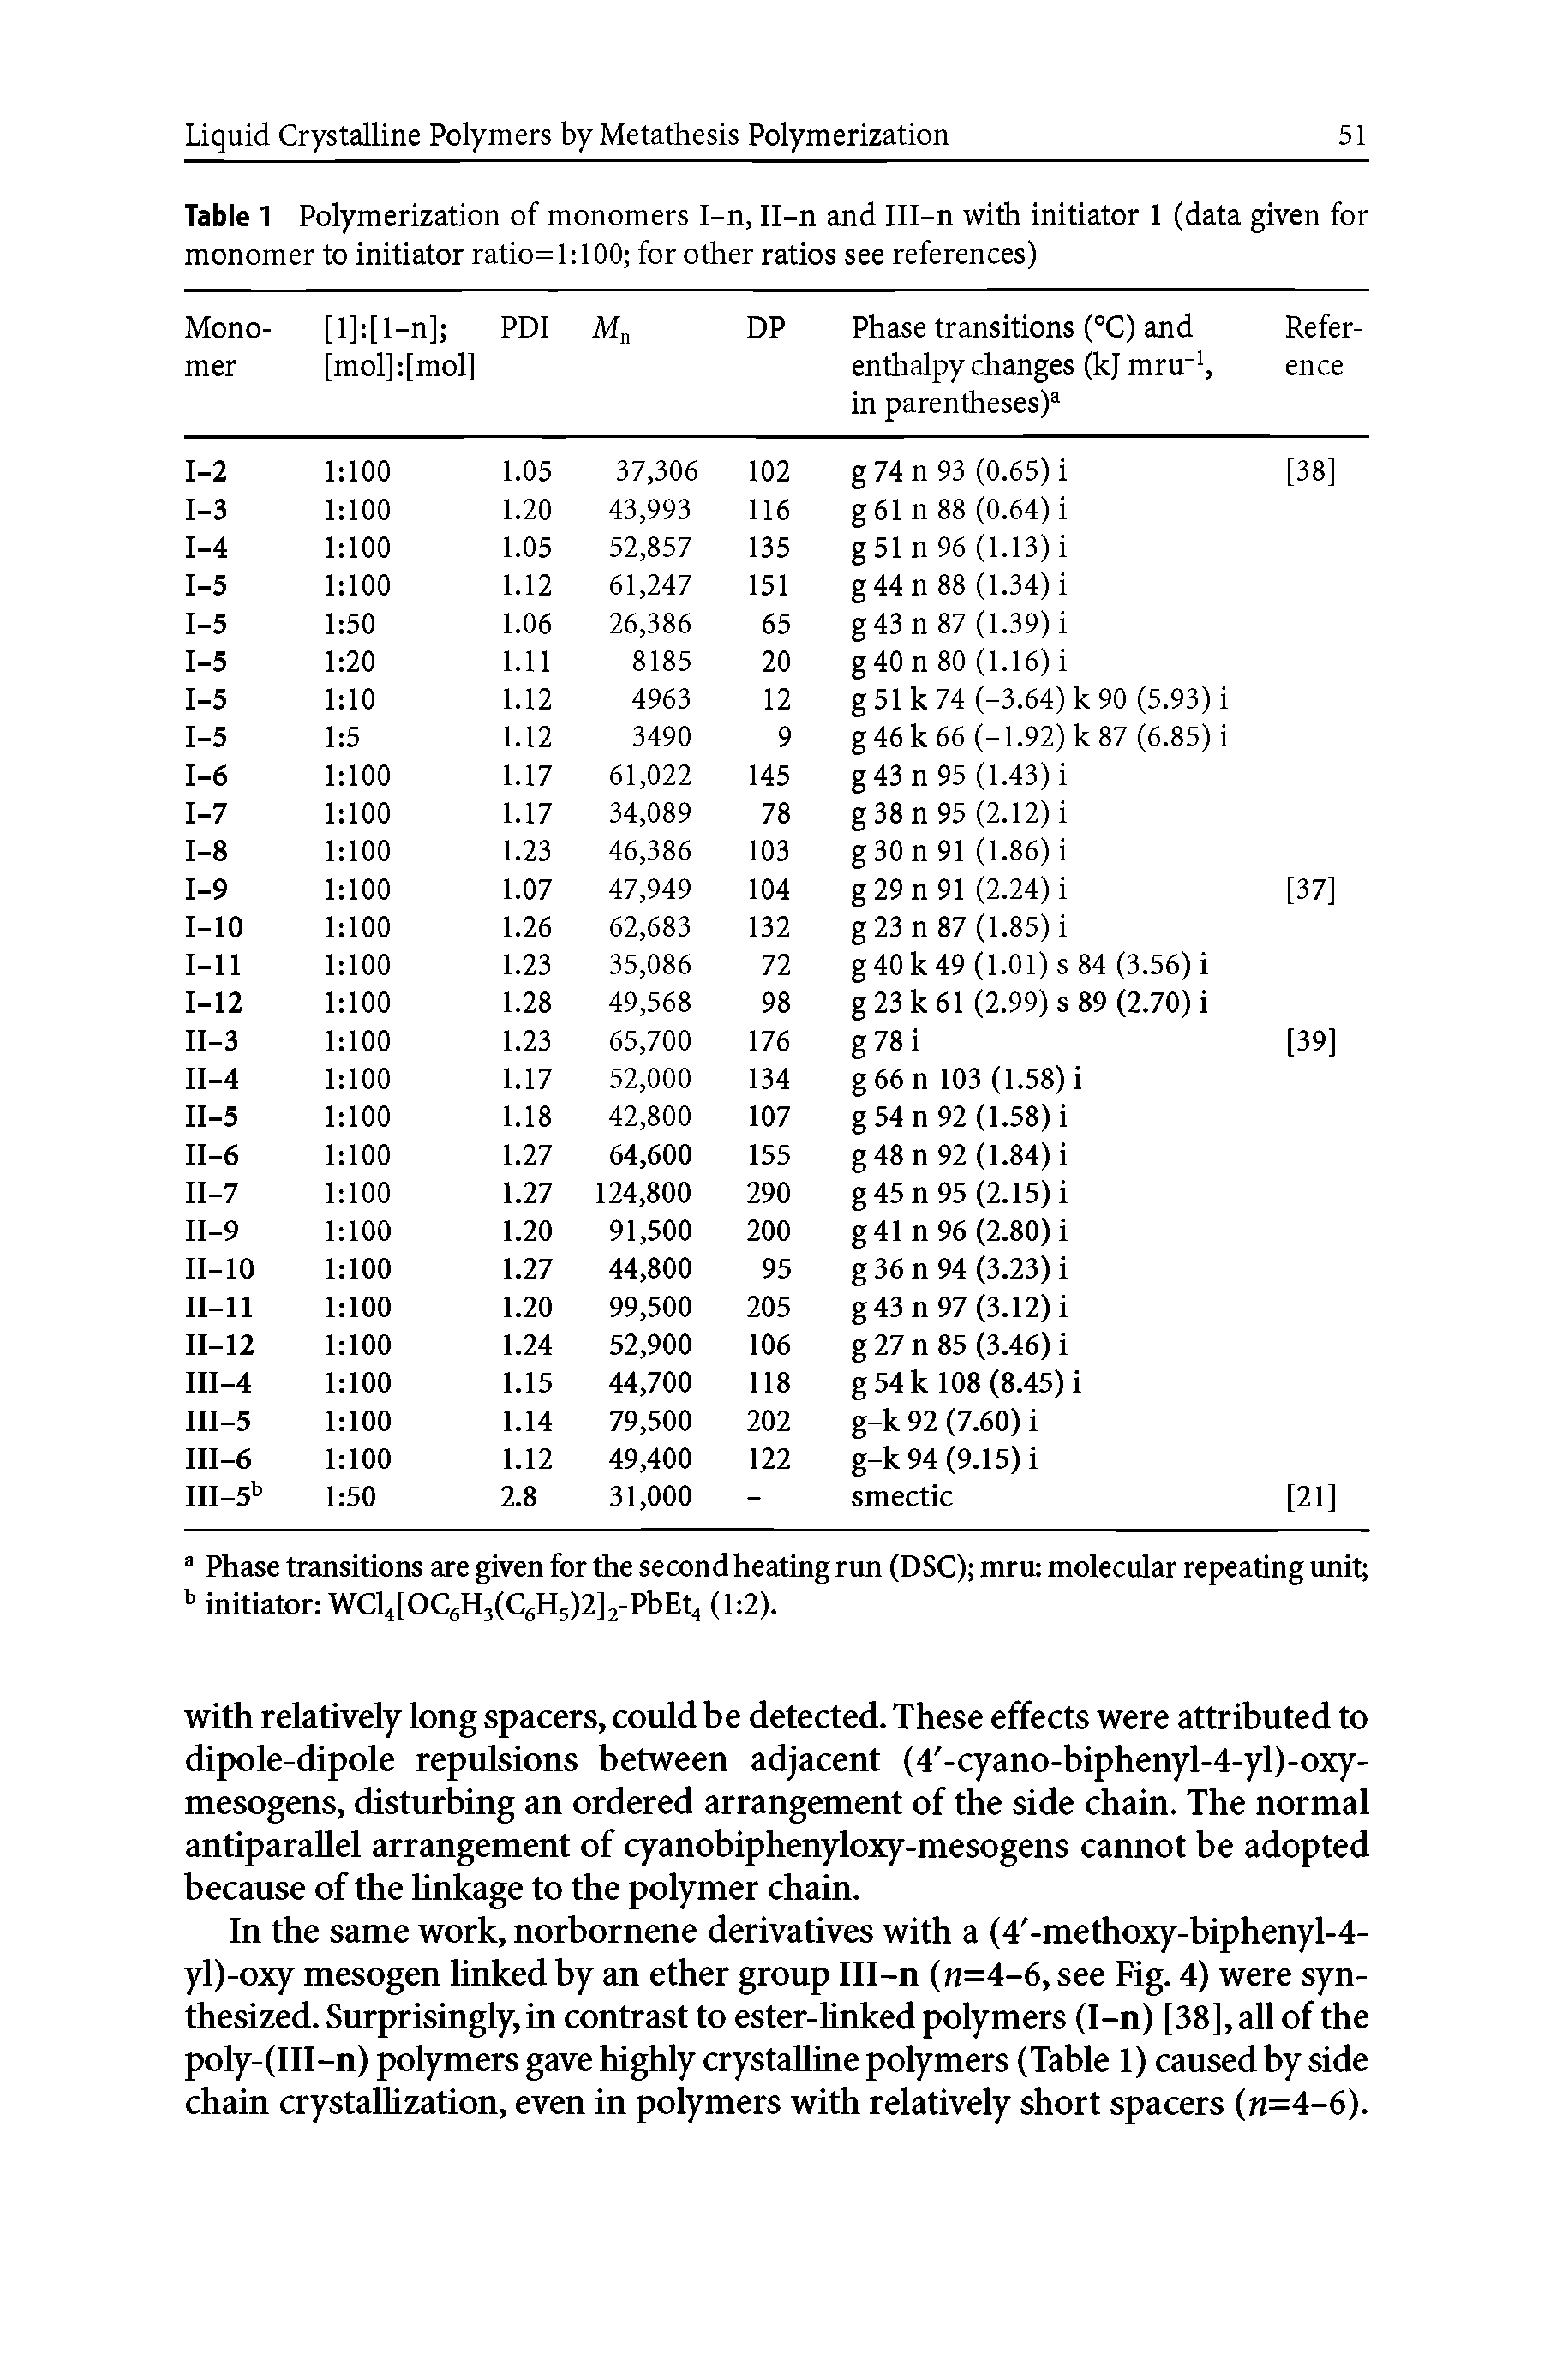 Table 1 Polymerization of monomers I-n, Il-n and Ill-n with initiator 1 (data given for monomer to initiator ratio= 1 100 for other ratios see references) ...